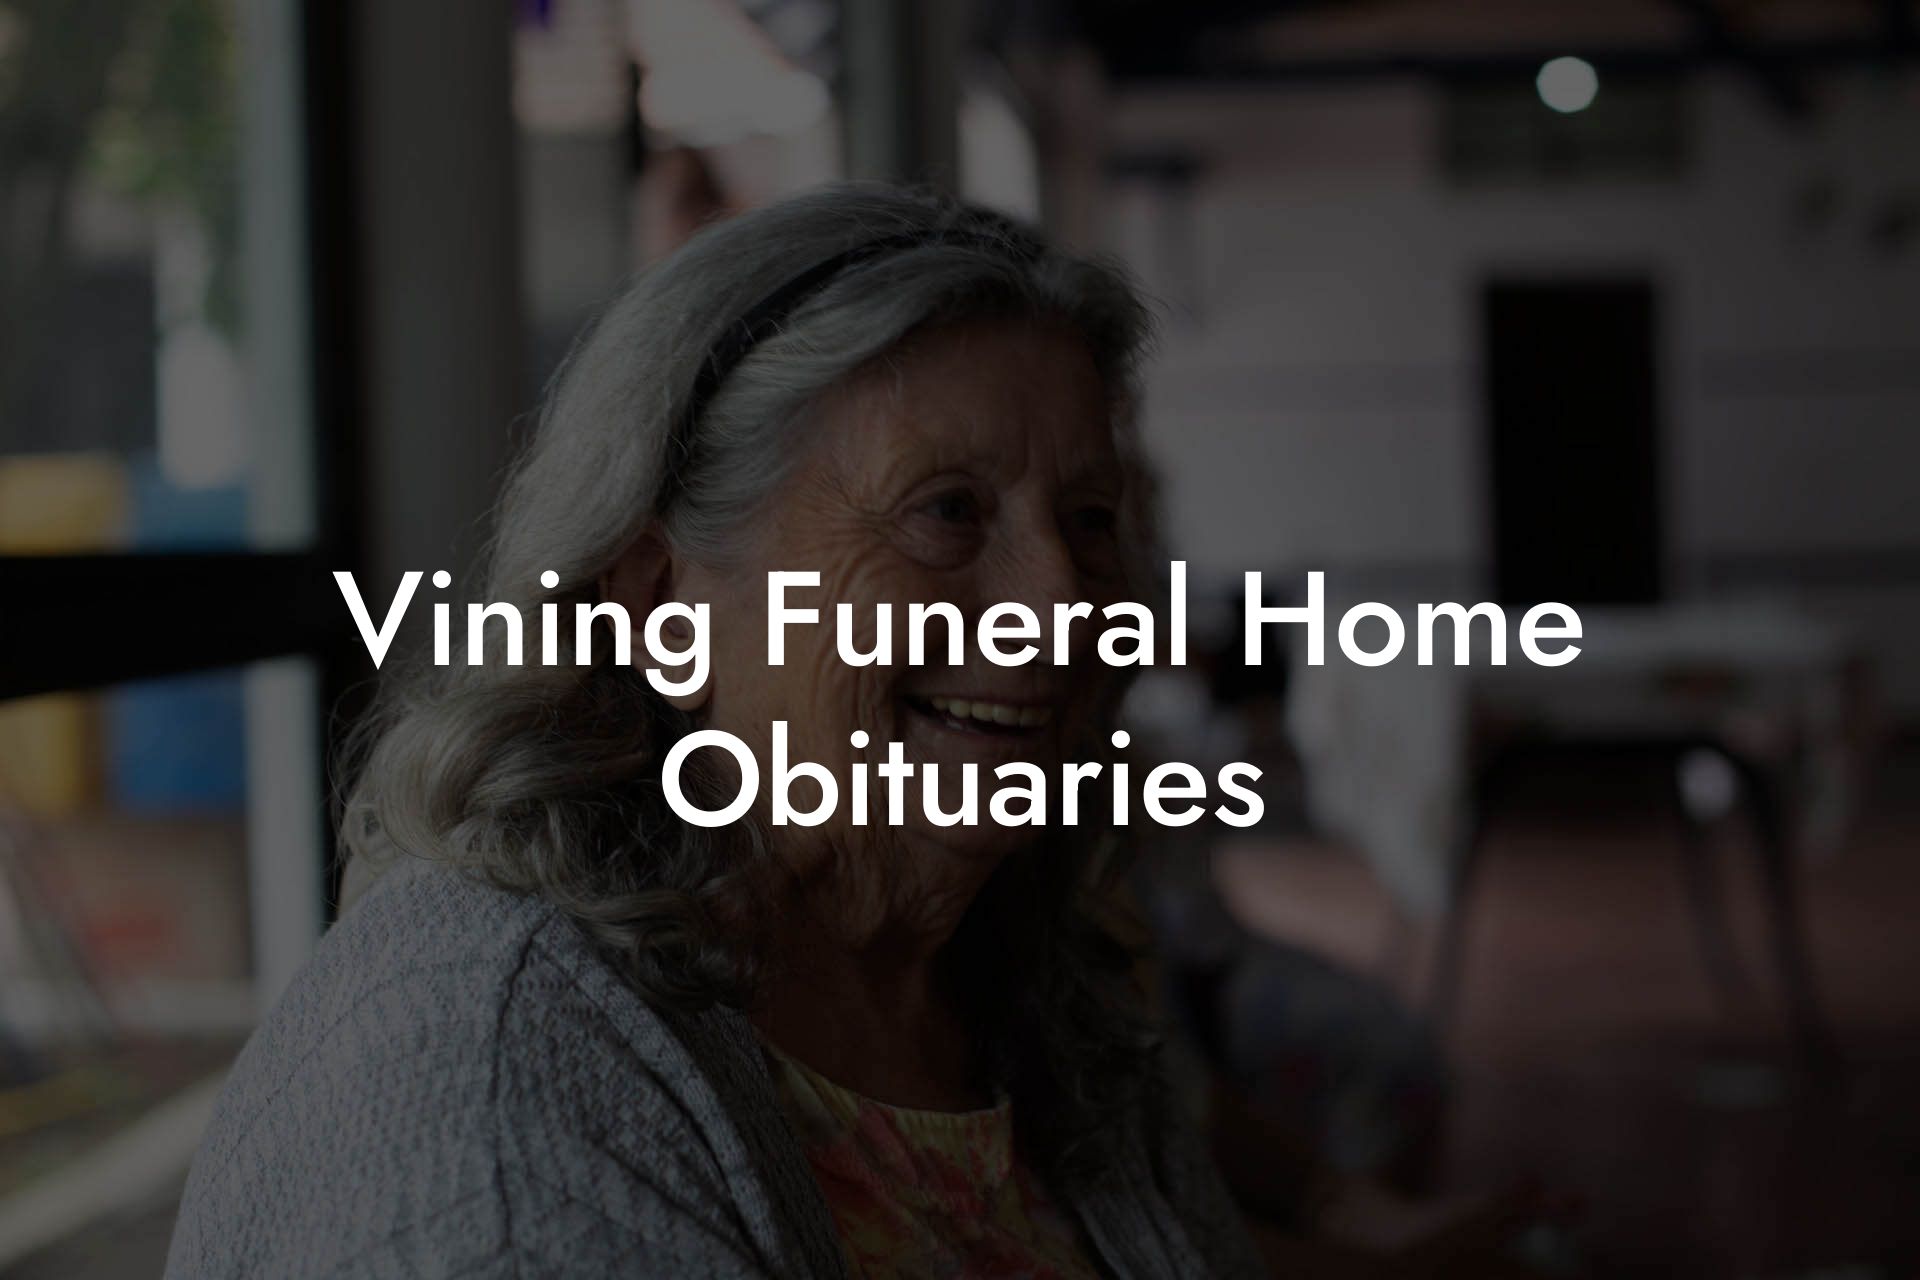 Vining Funeral Home Obituaries